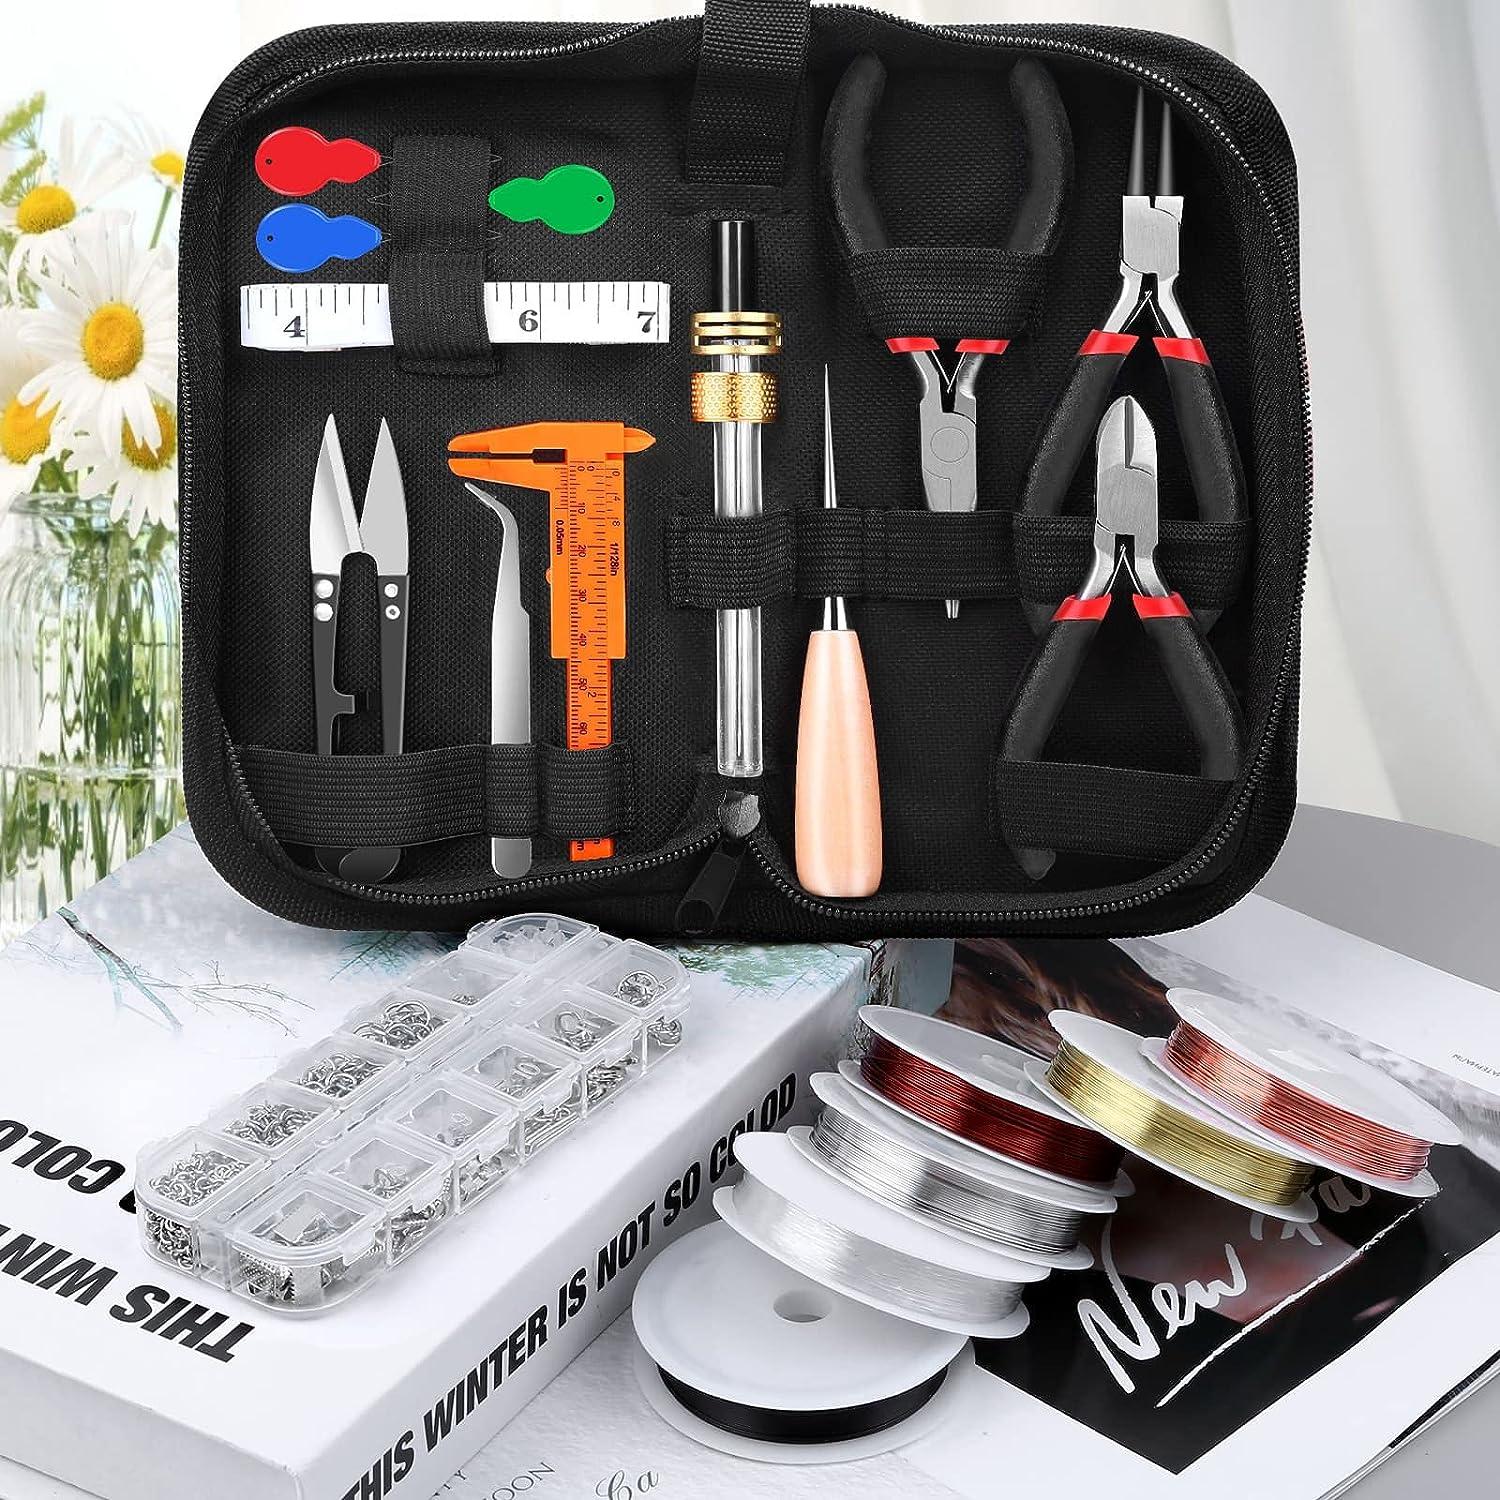 Complete Jewelry Making Kit With Carver The Wire Wrapping, Beading Tools,  Hands Findings, And Pendants From Eujjt, $62.73